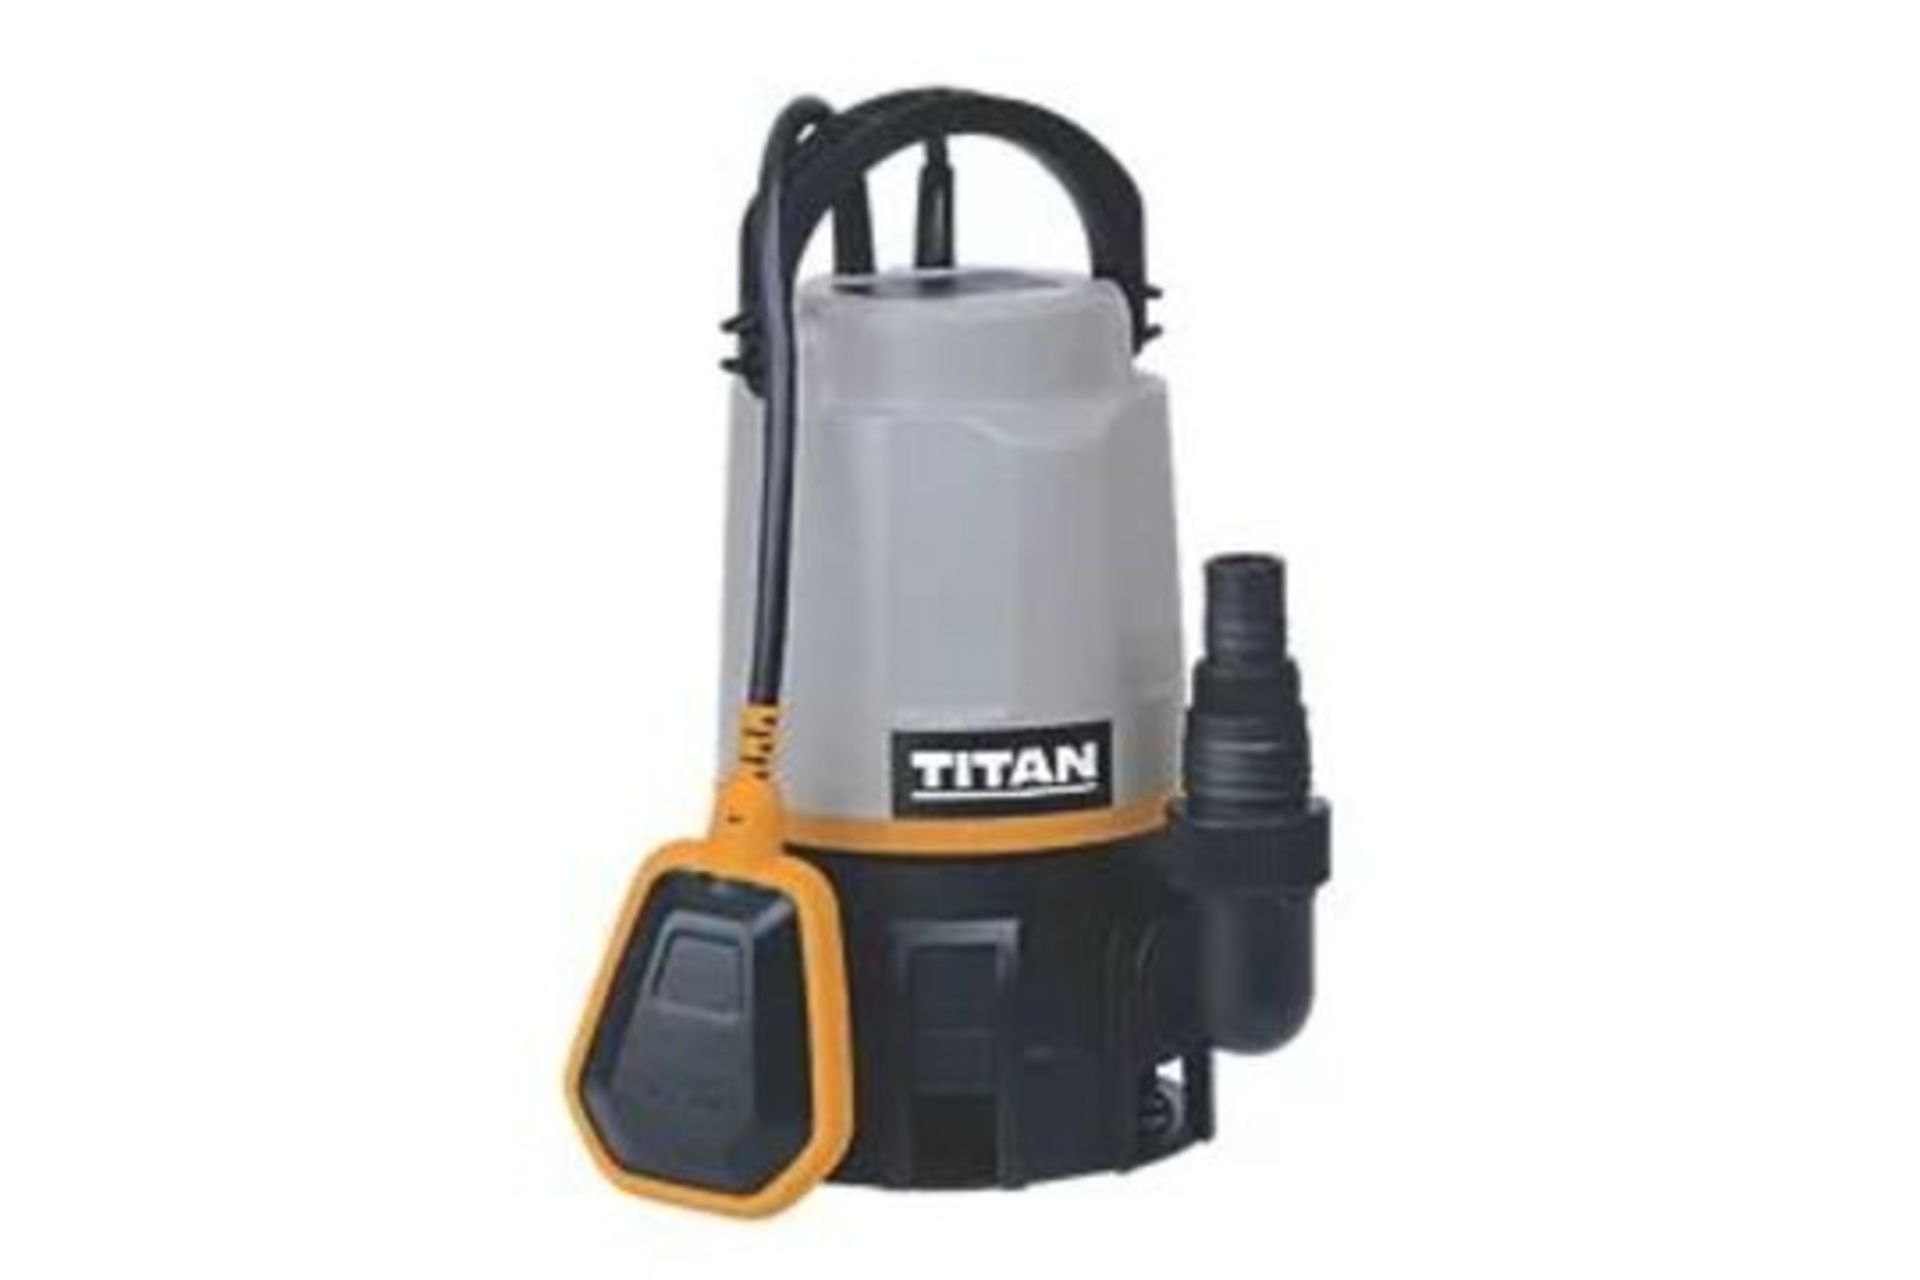 TITAN TTB843PMP 400W MAINS-POWERED MULTI USE PUMP. - R13a.7. Suitable for submersion, clearing dirty